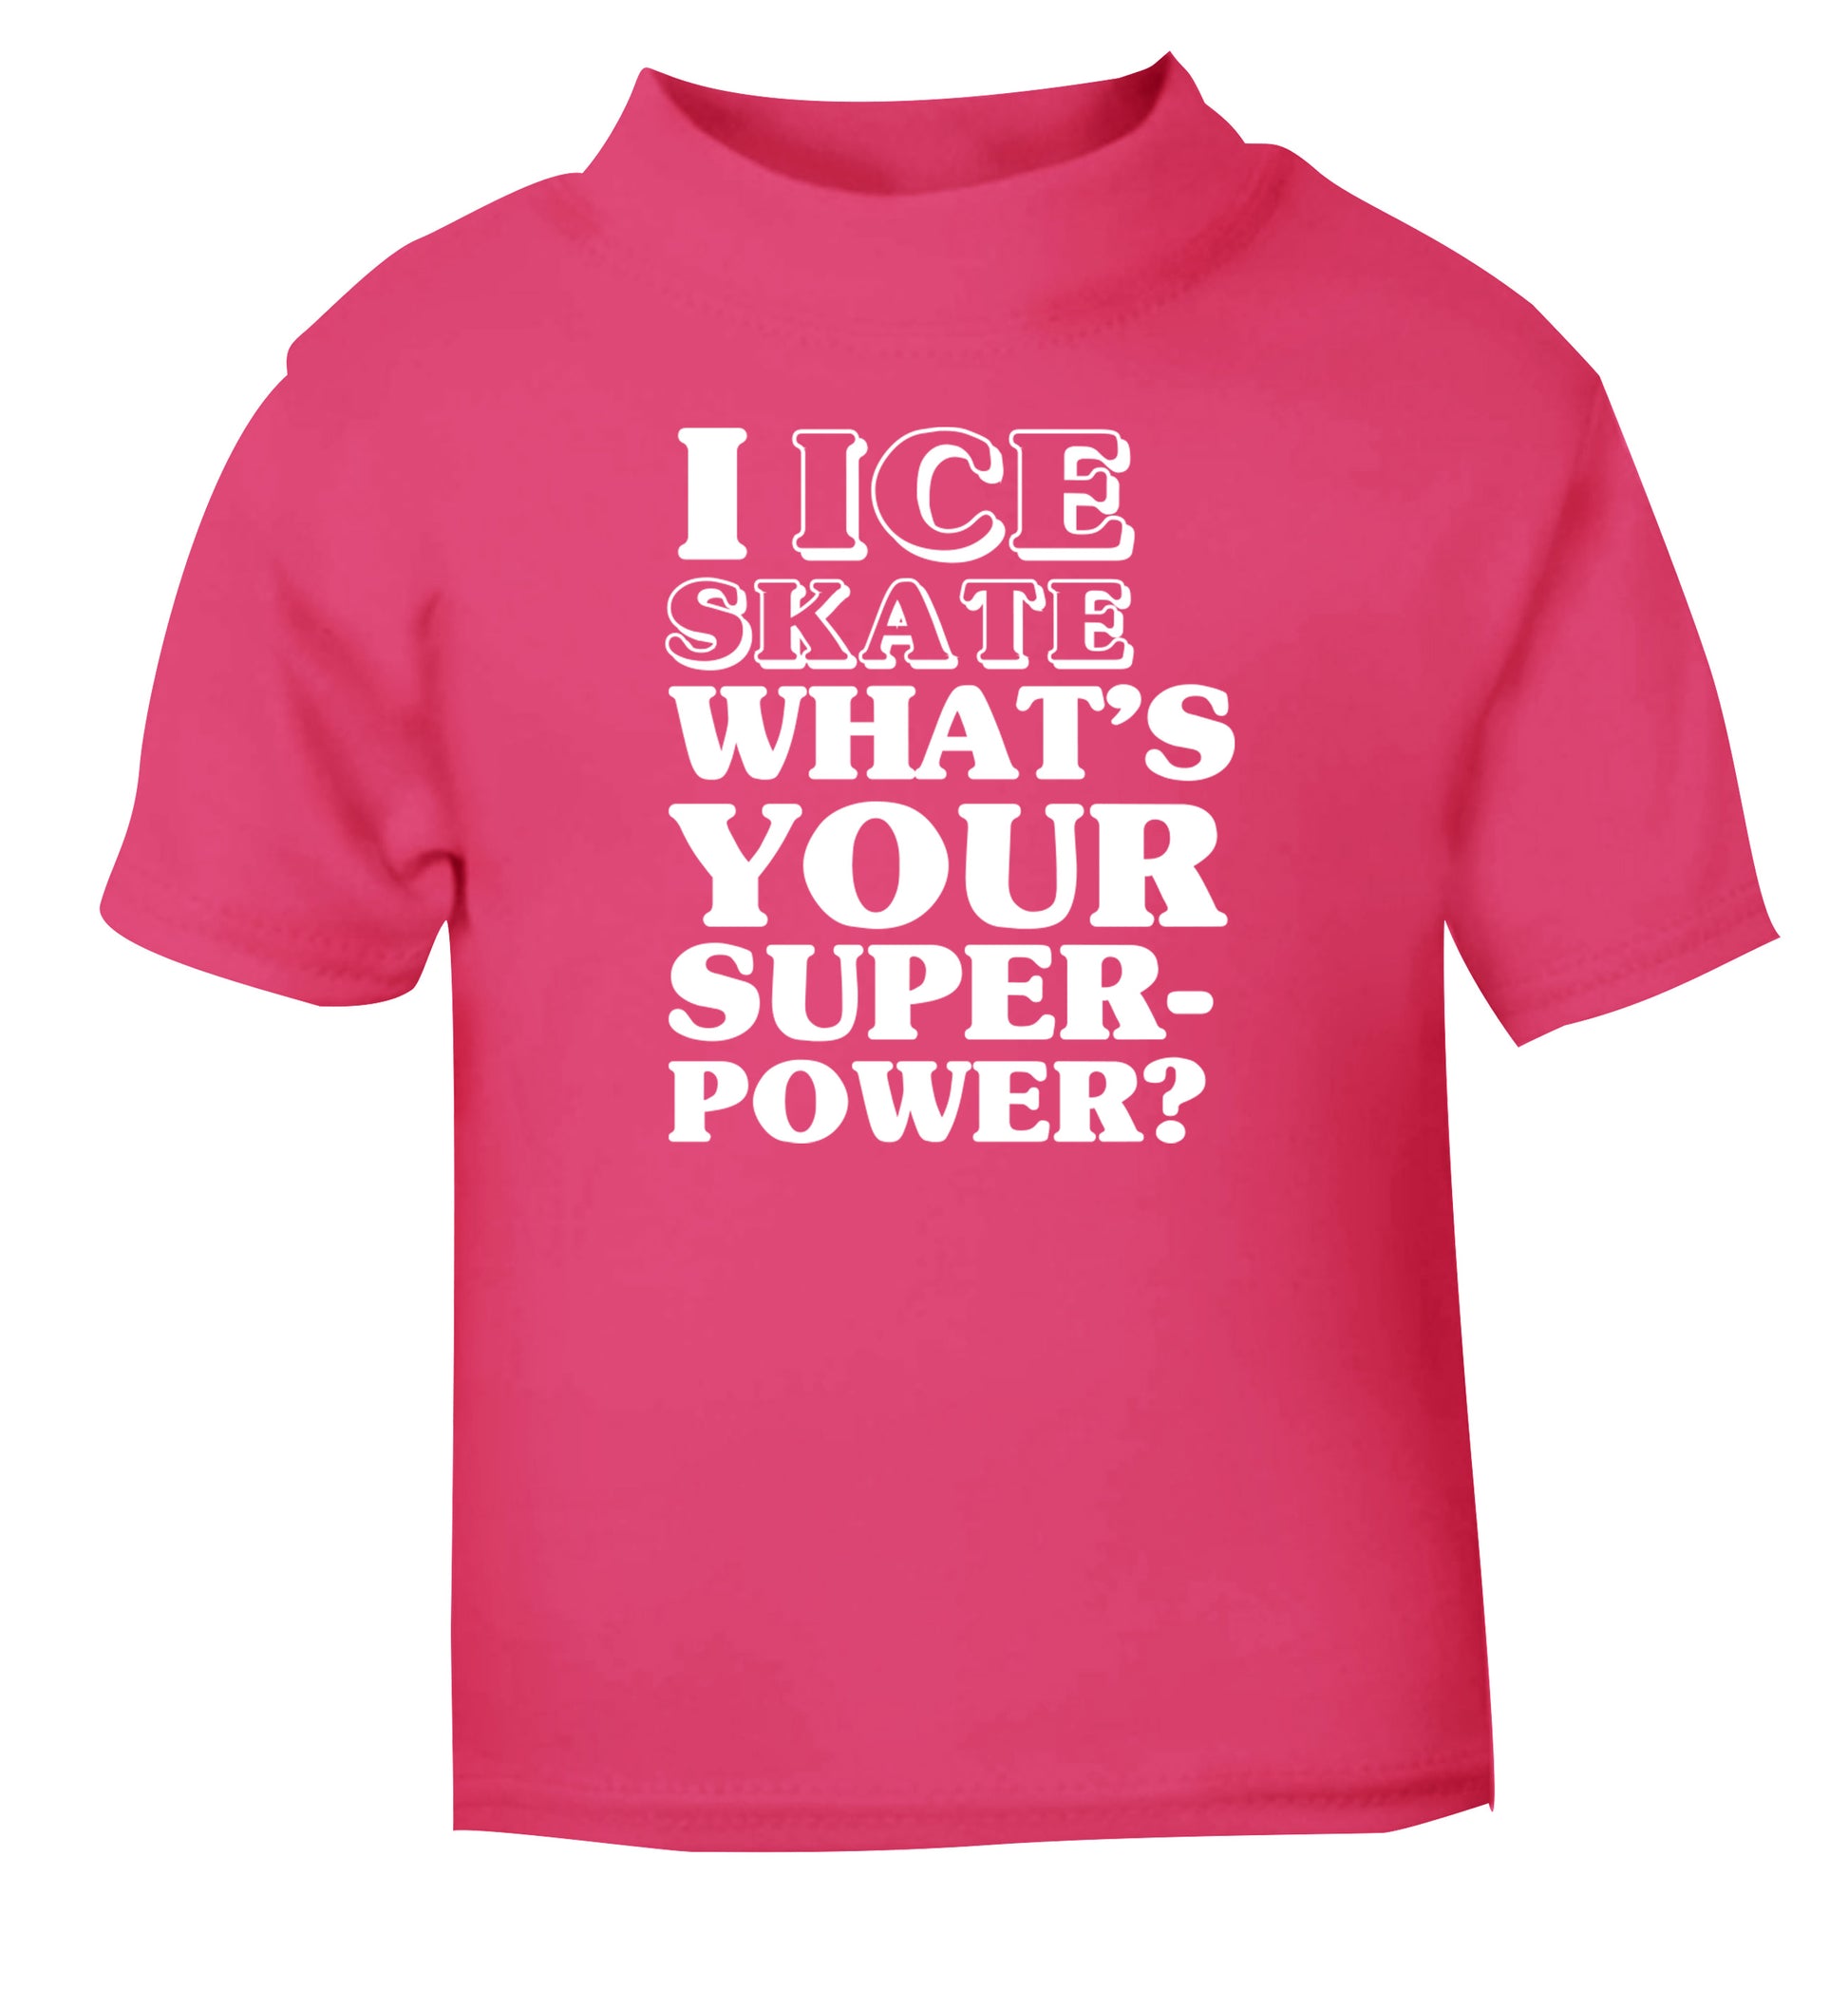 I ice skate what's your superpower? pink Baby Toddler Tshirt 2 Years